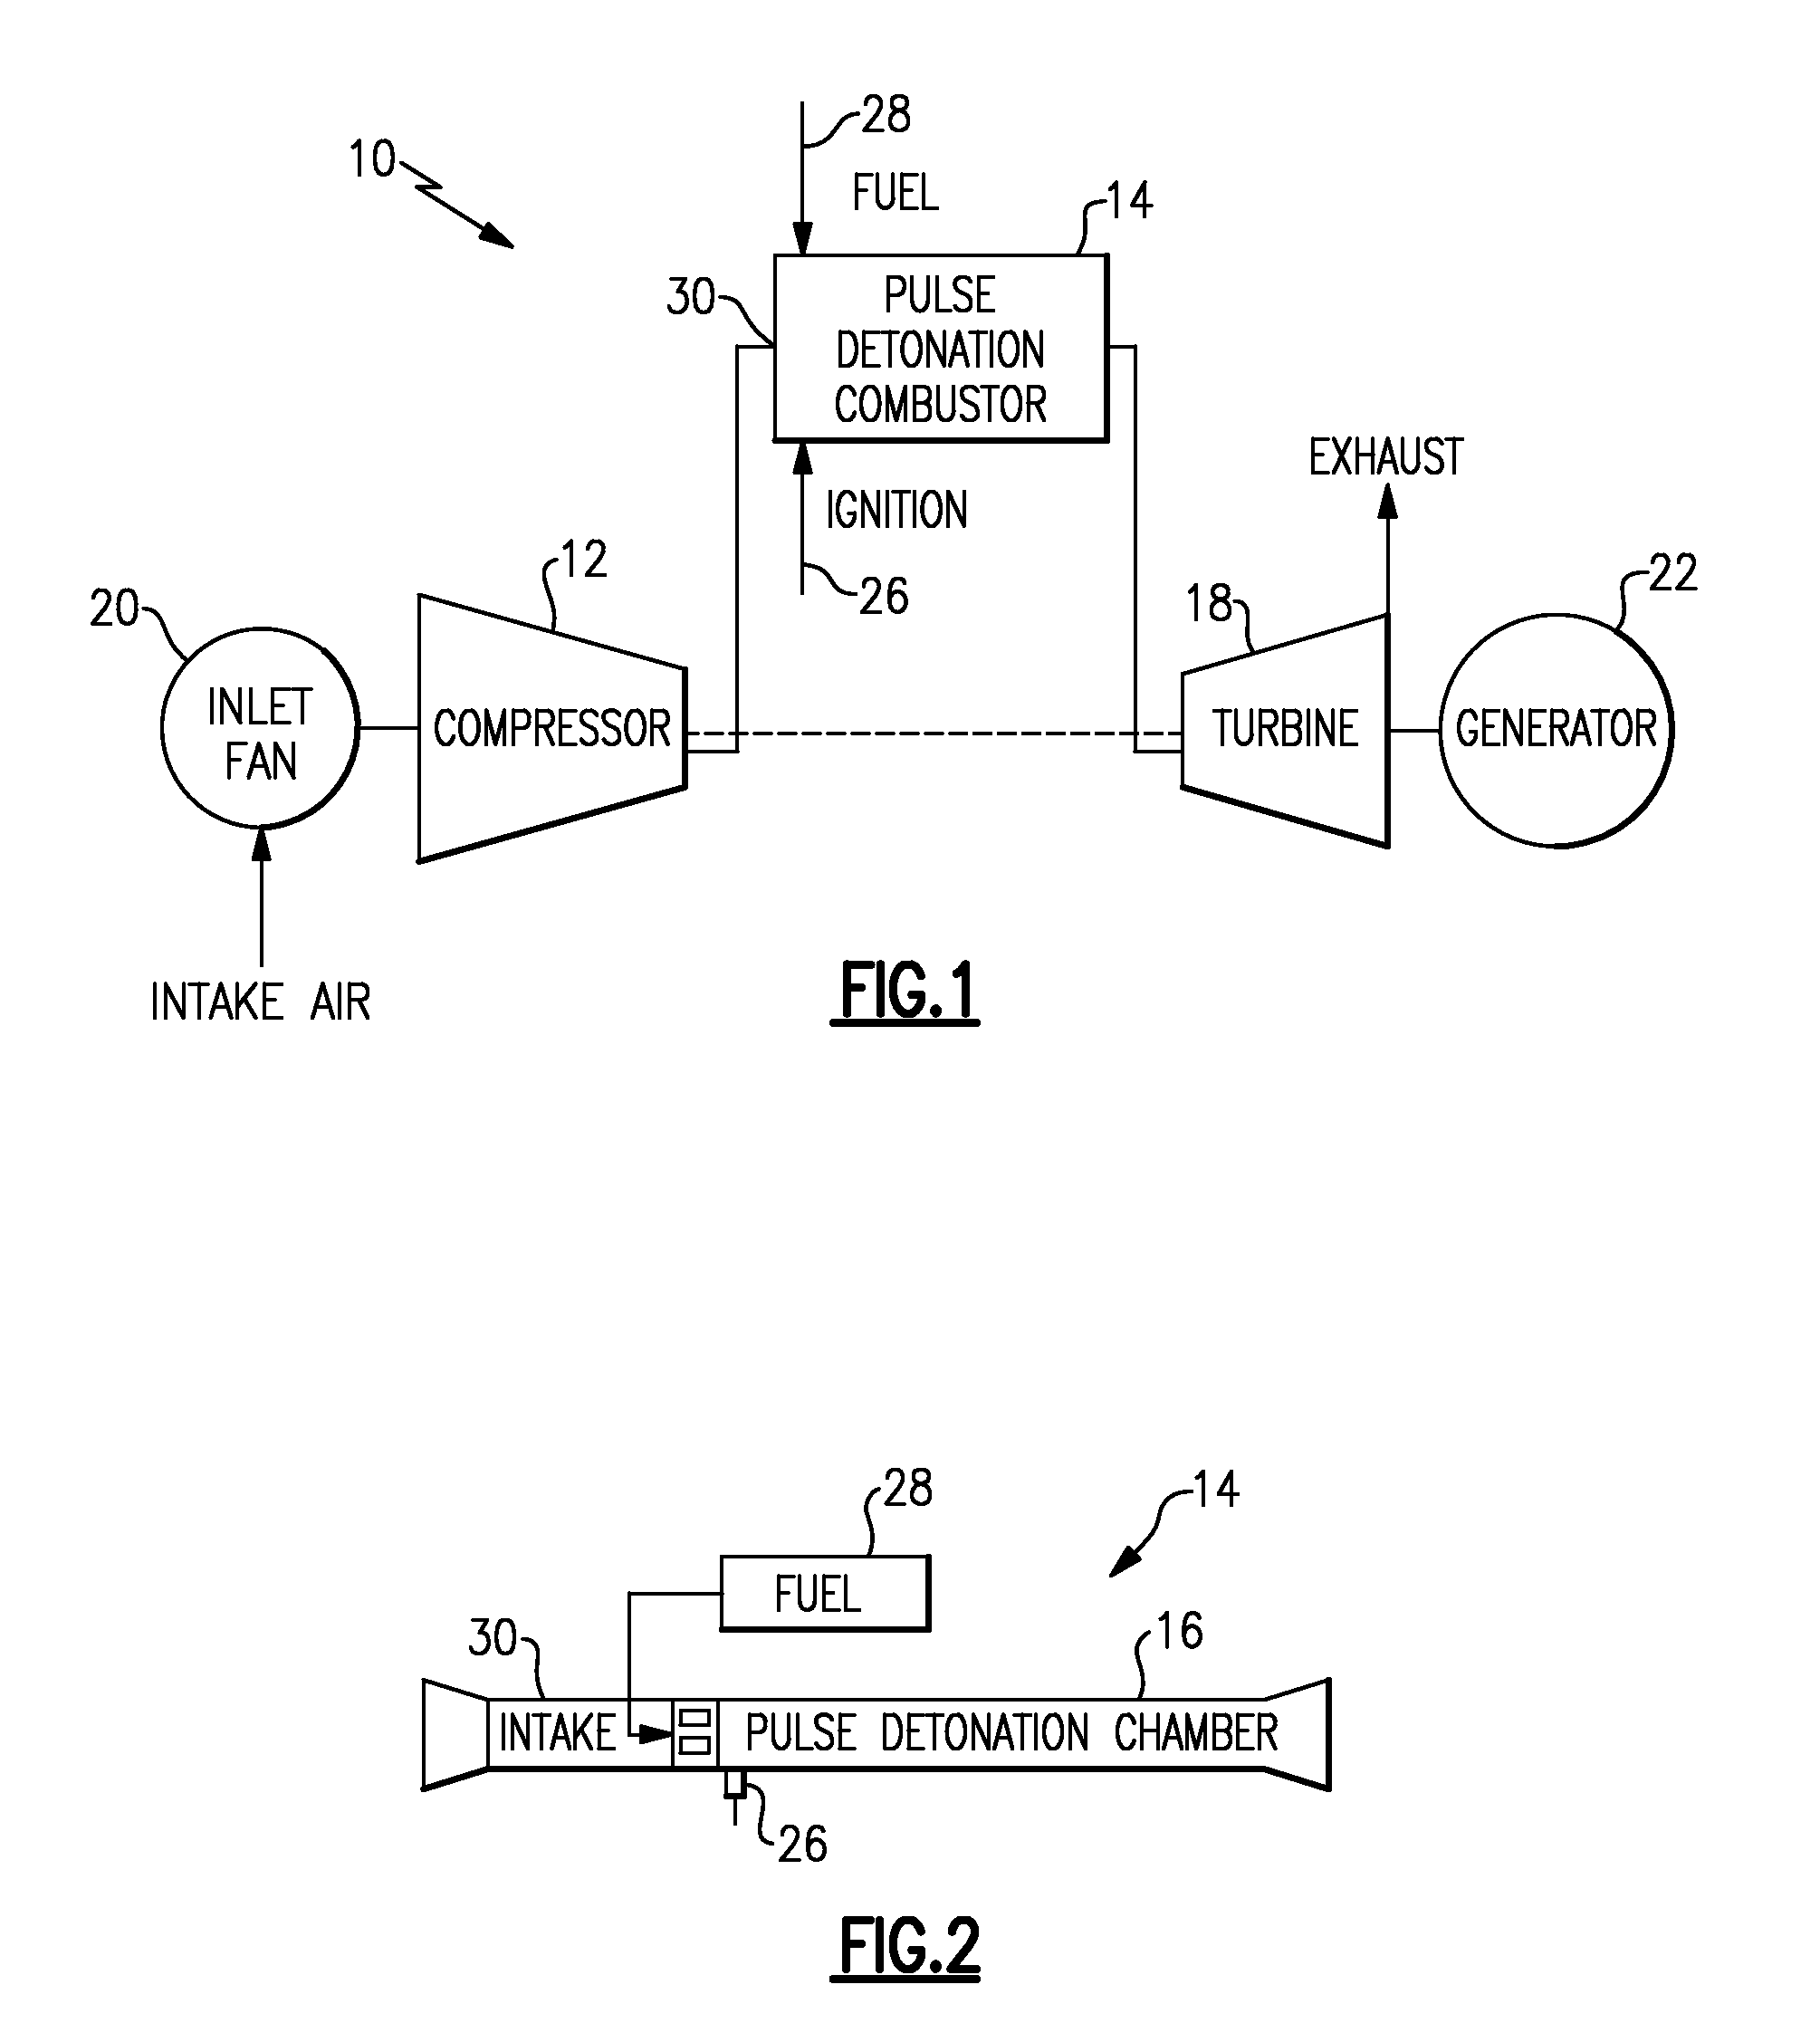 Integrated deflagration-to-detonation obstacles and cooling fluid flow